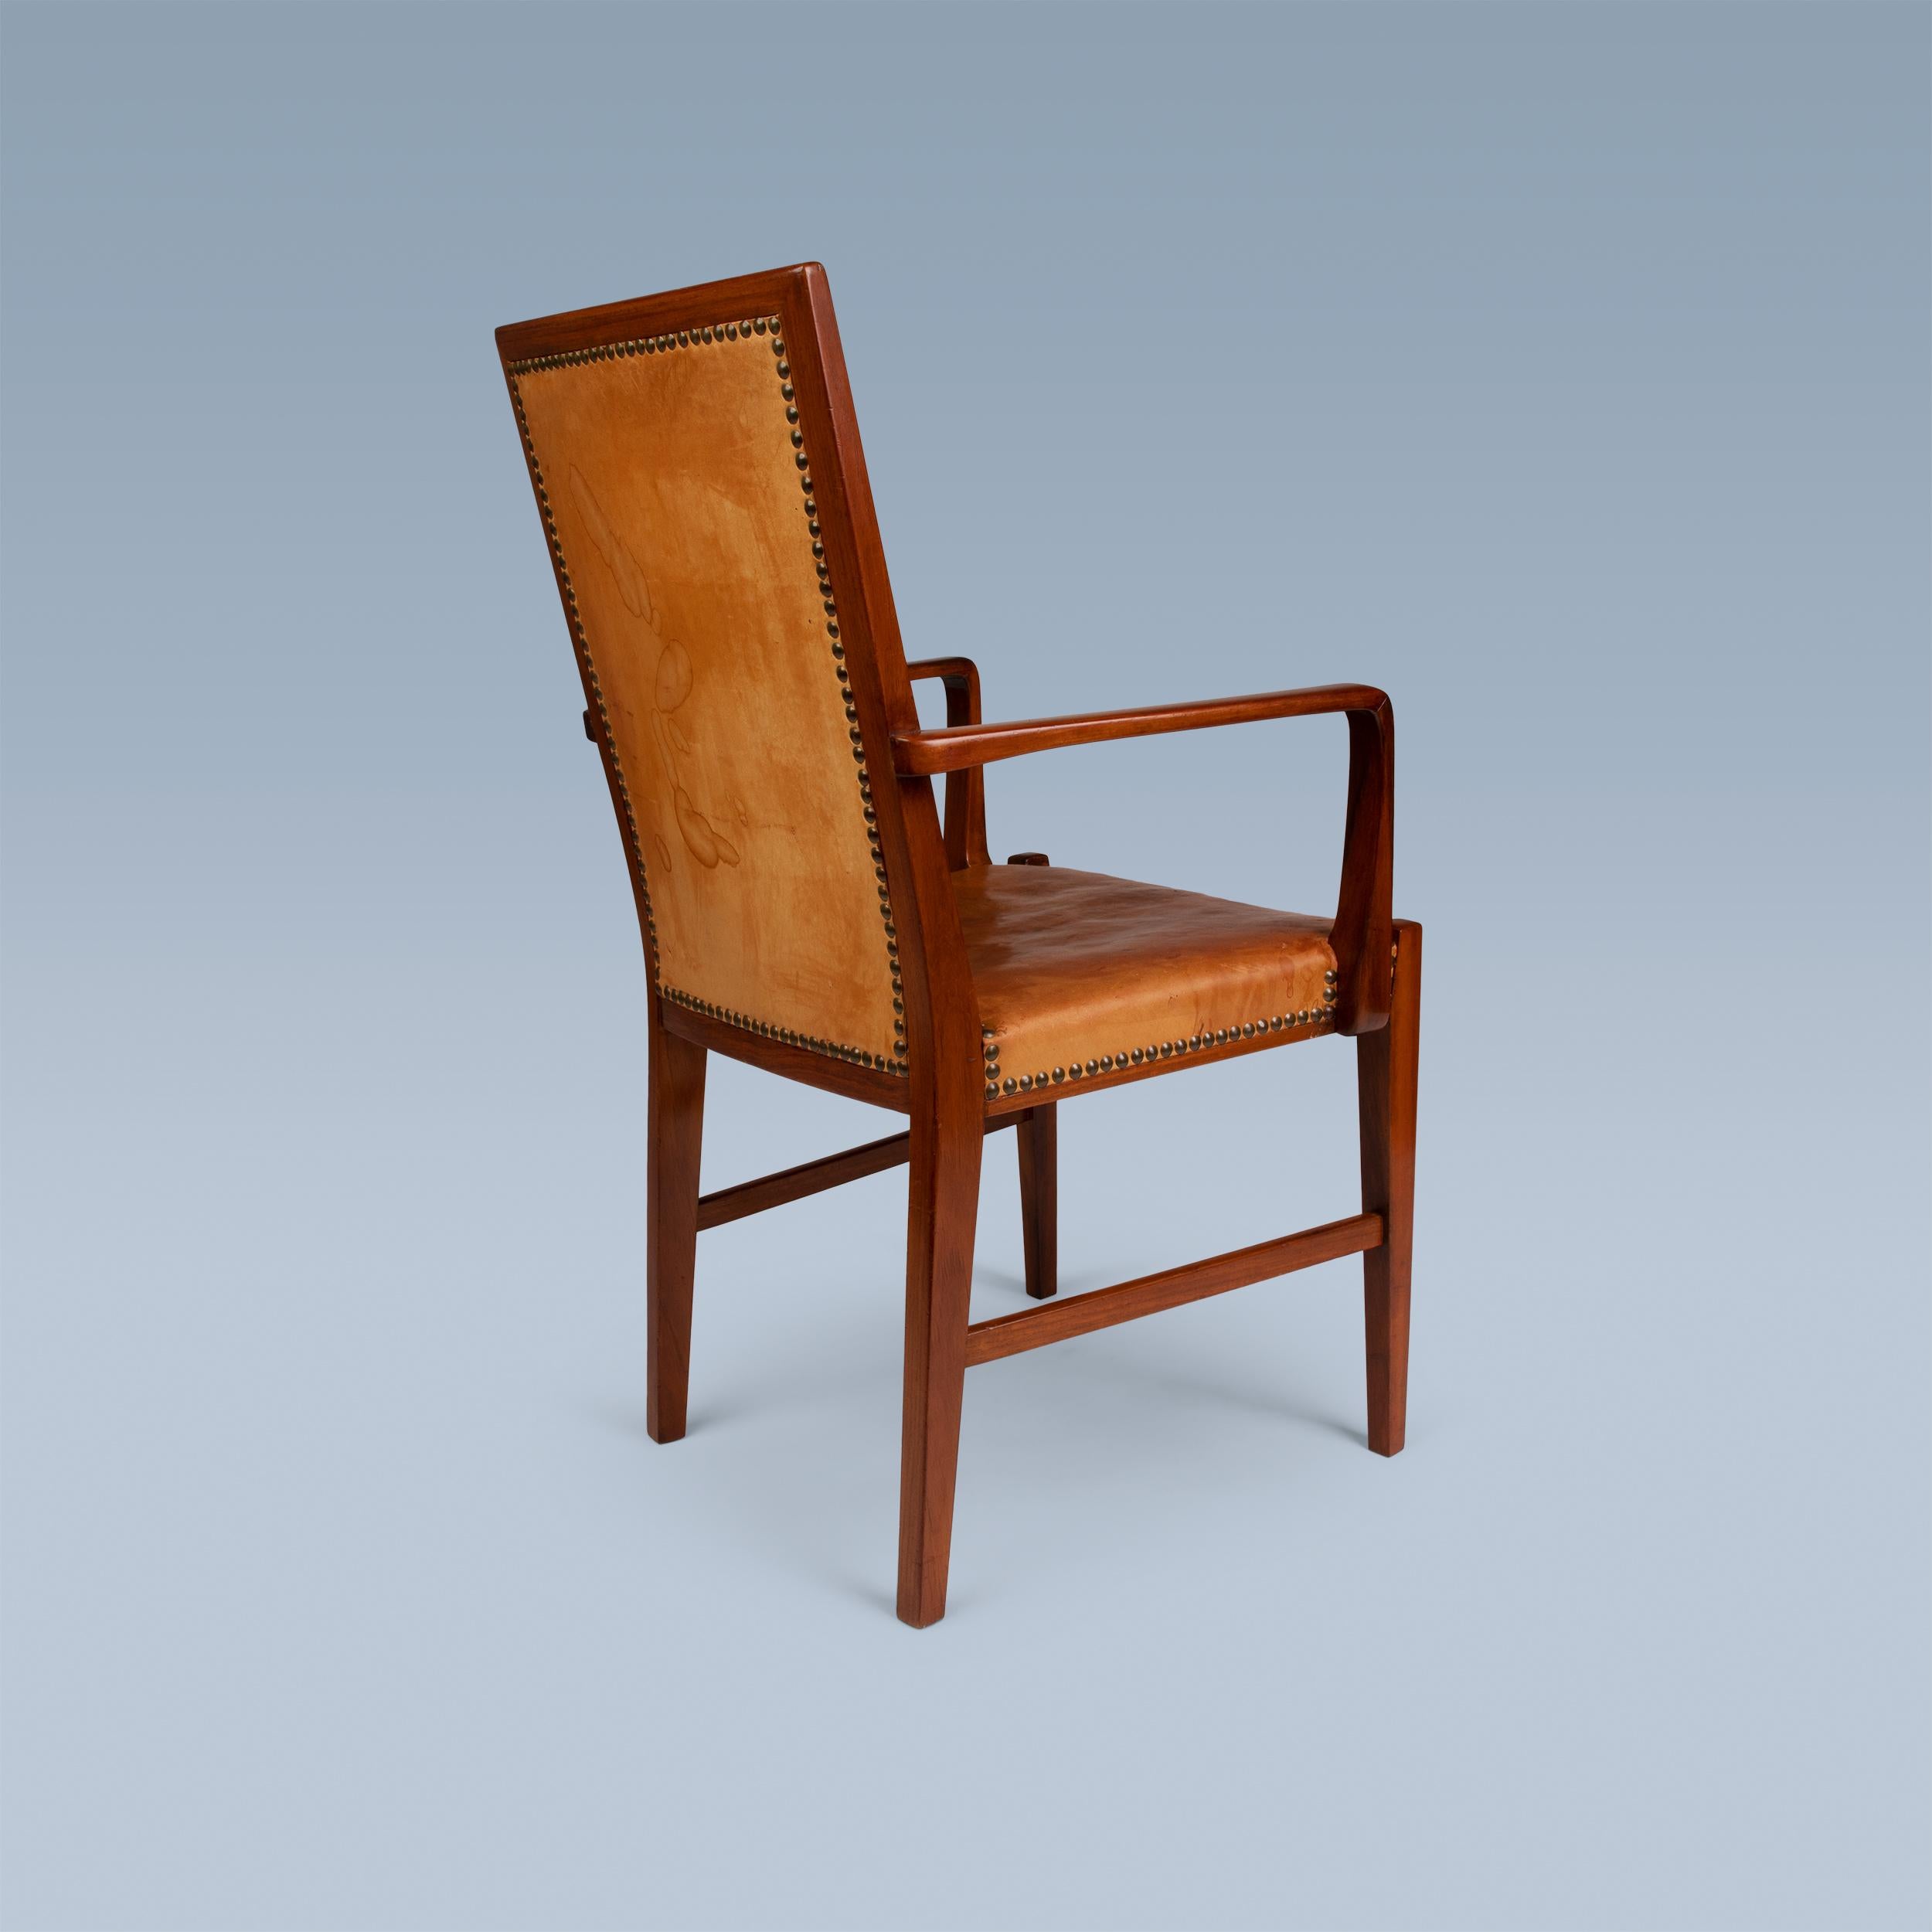 20th Century High back nut wood armchair with leather seat and back by Danish cabinetmaker For Sale